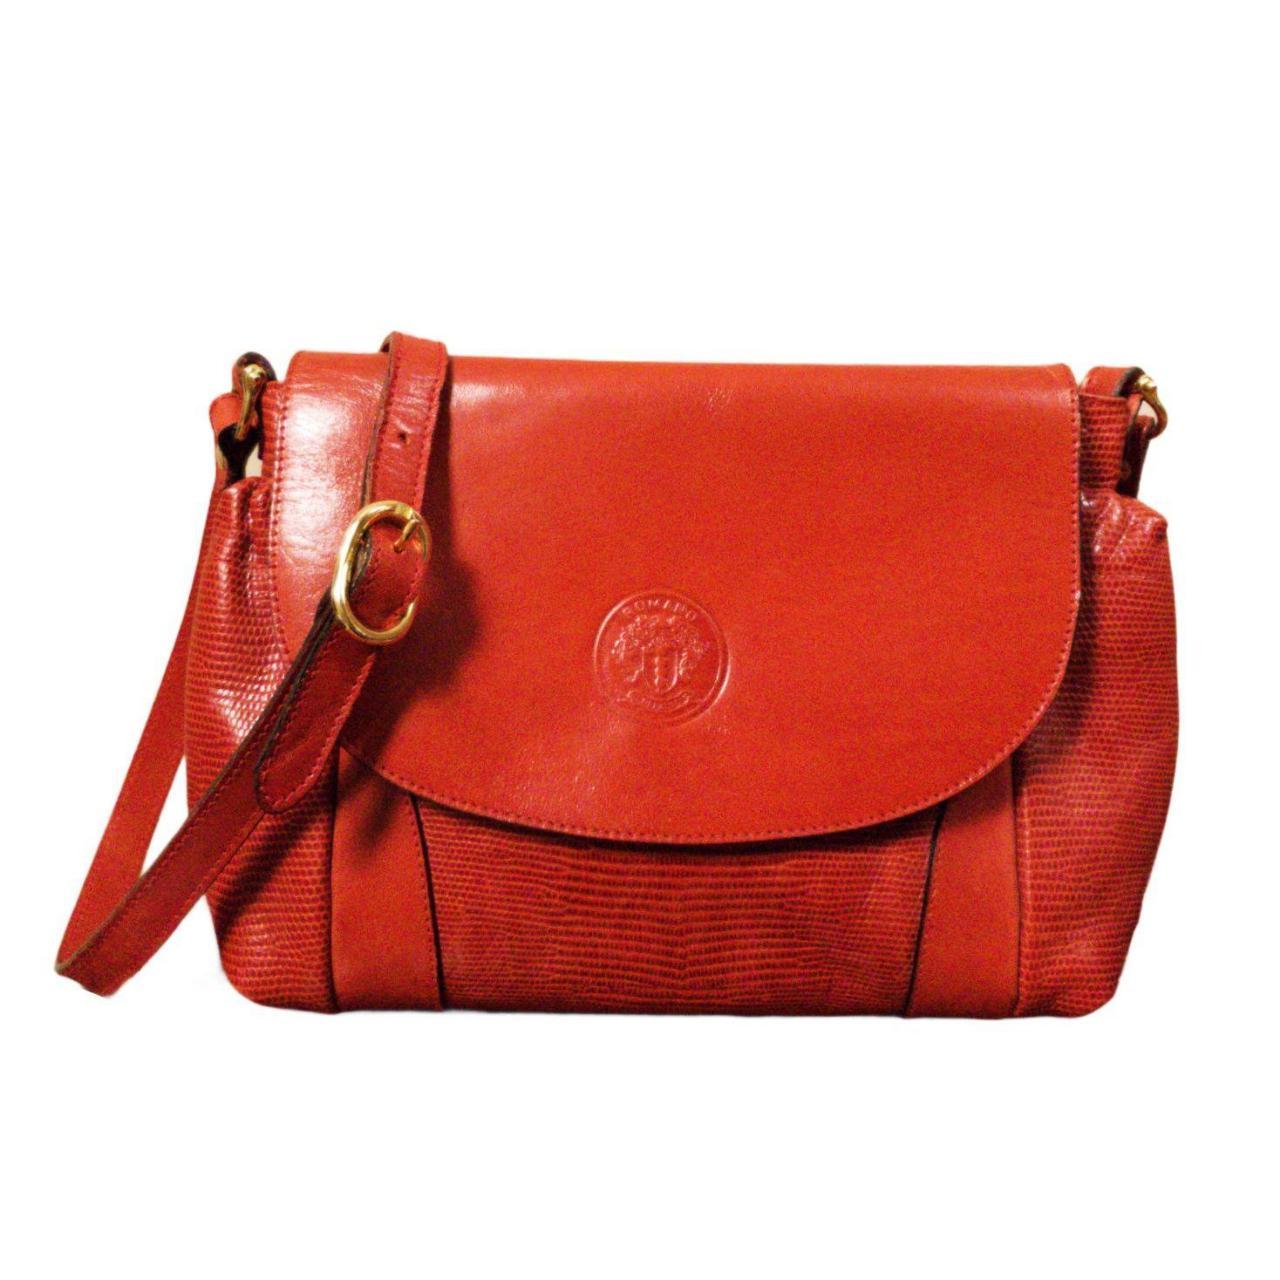 Product Image 1 - Vintage Red Leather Crossbody Bag

Romano